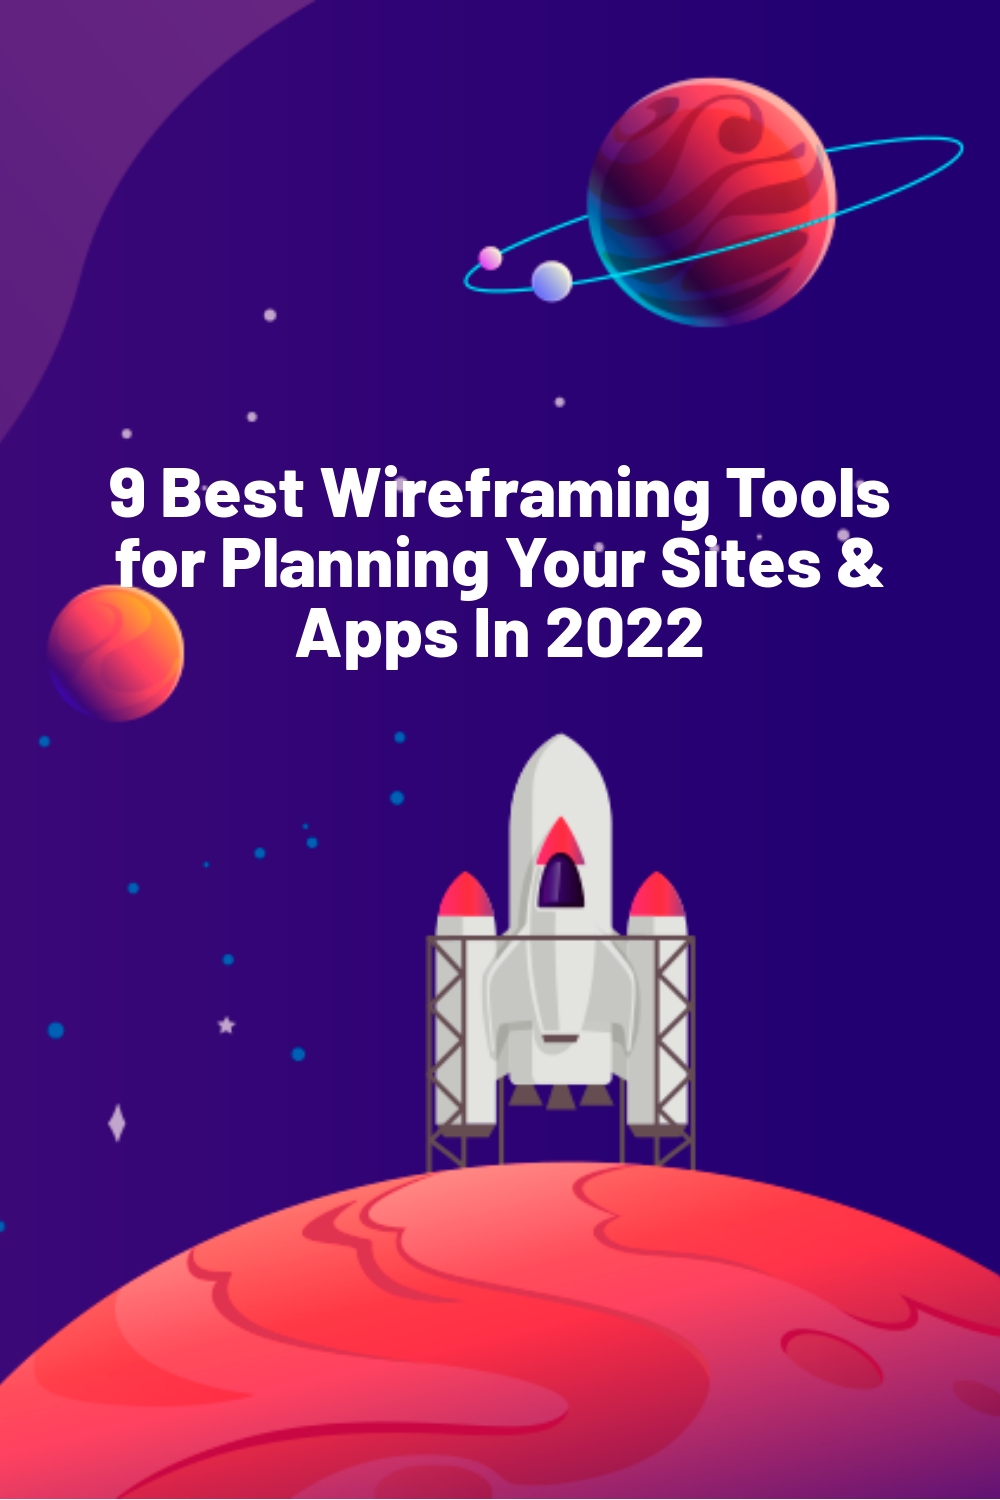 9 Best Wireframing Tools for Planning Your Sites & Apps In 2022